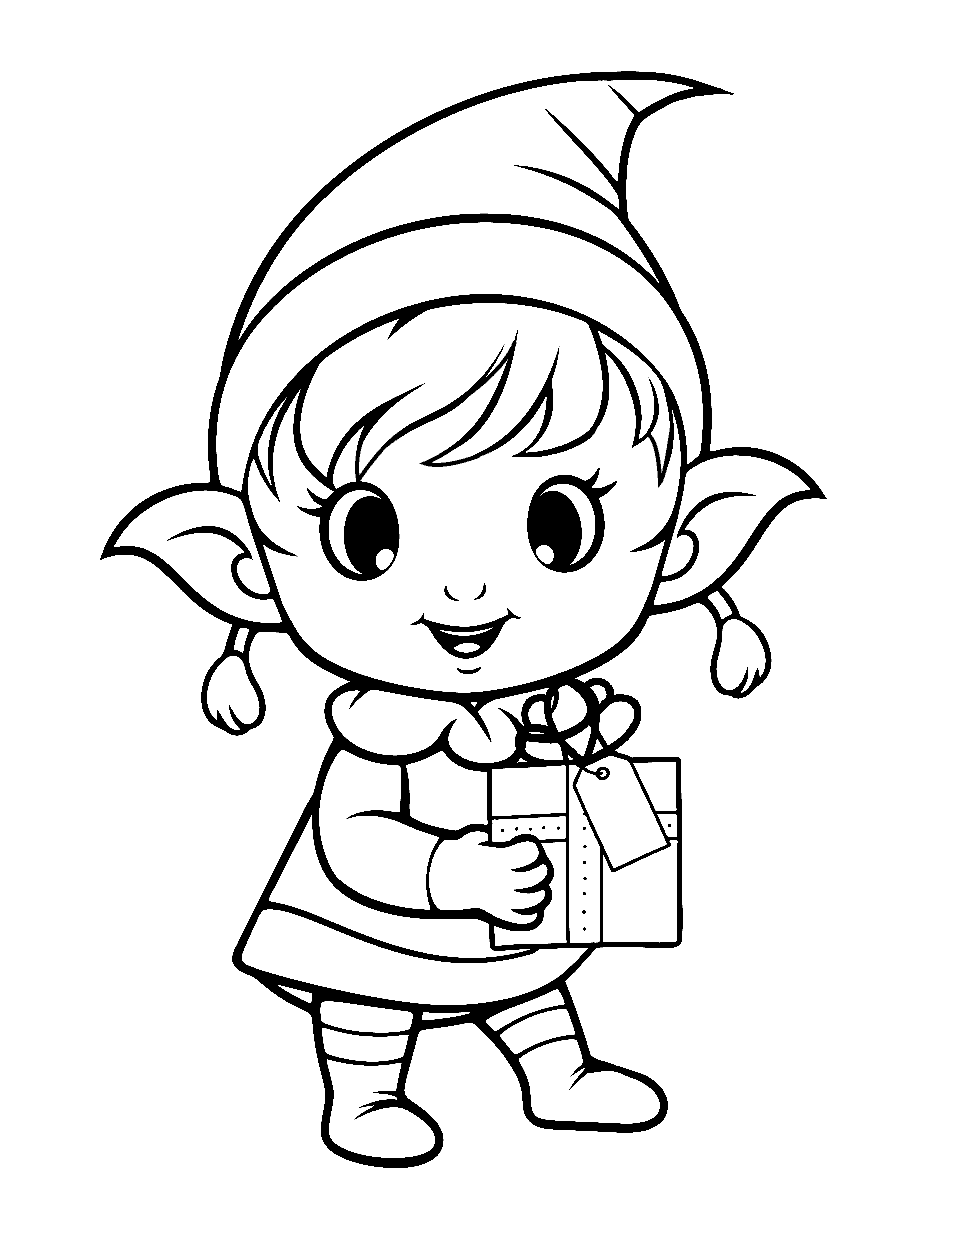 Cute Baby Elf With Gift Coloring Page - A baby elf holding a Christmas gift.